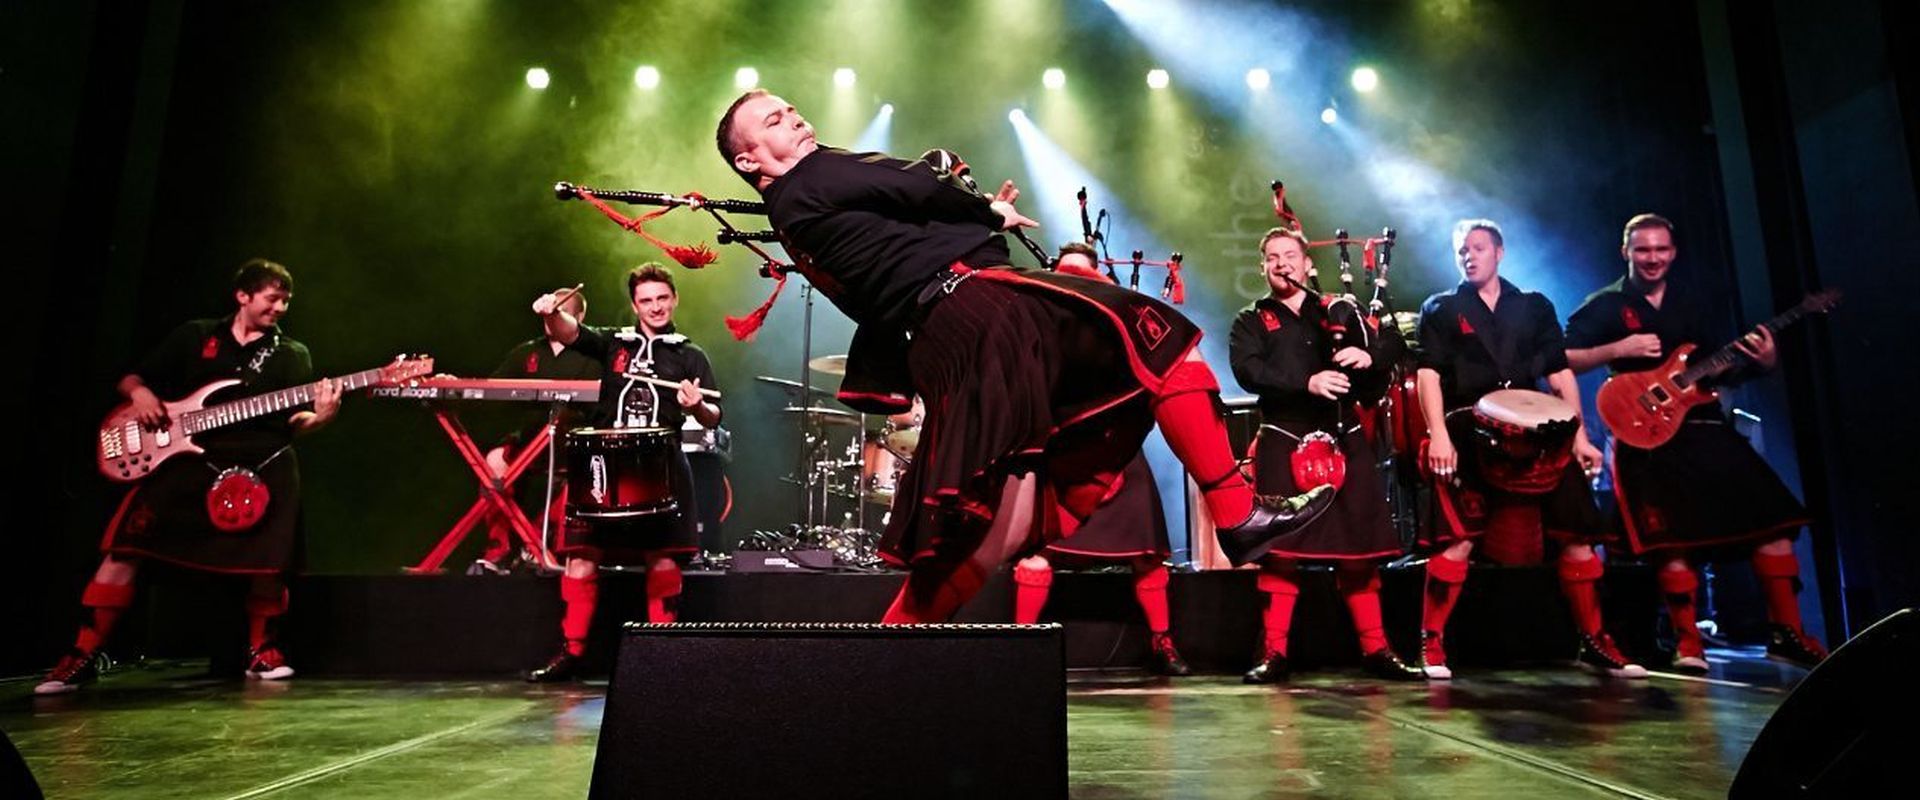 Red Hot Chilli Pipers at Blackpool Grand Theatre June 2022, Blackpool, United Kingdom